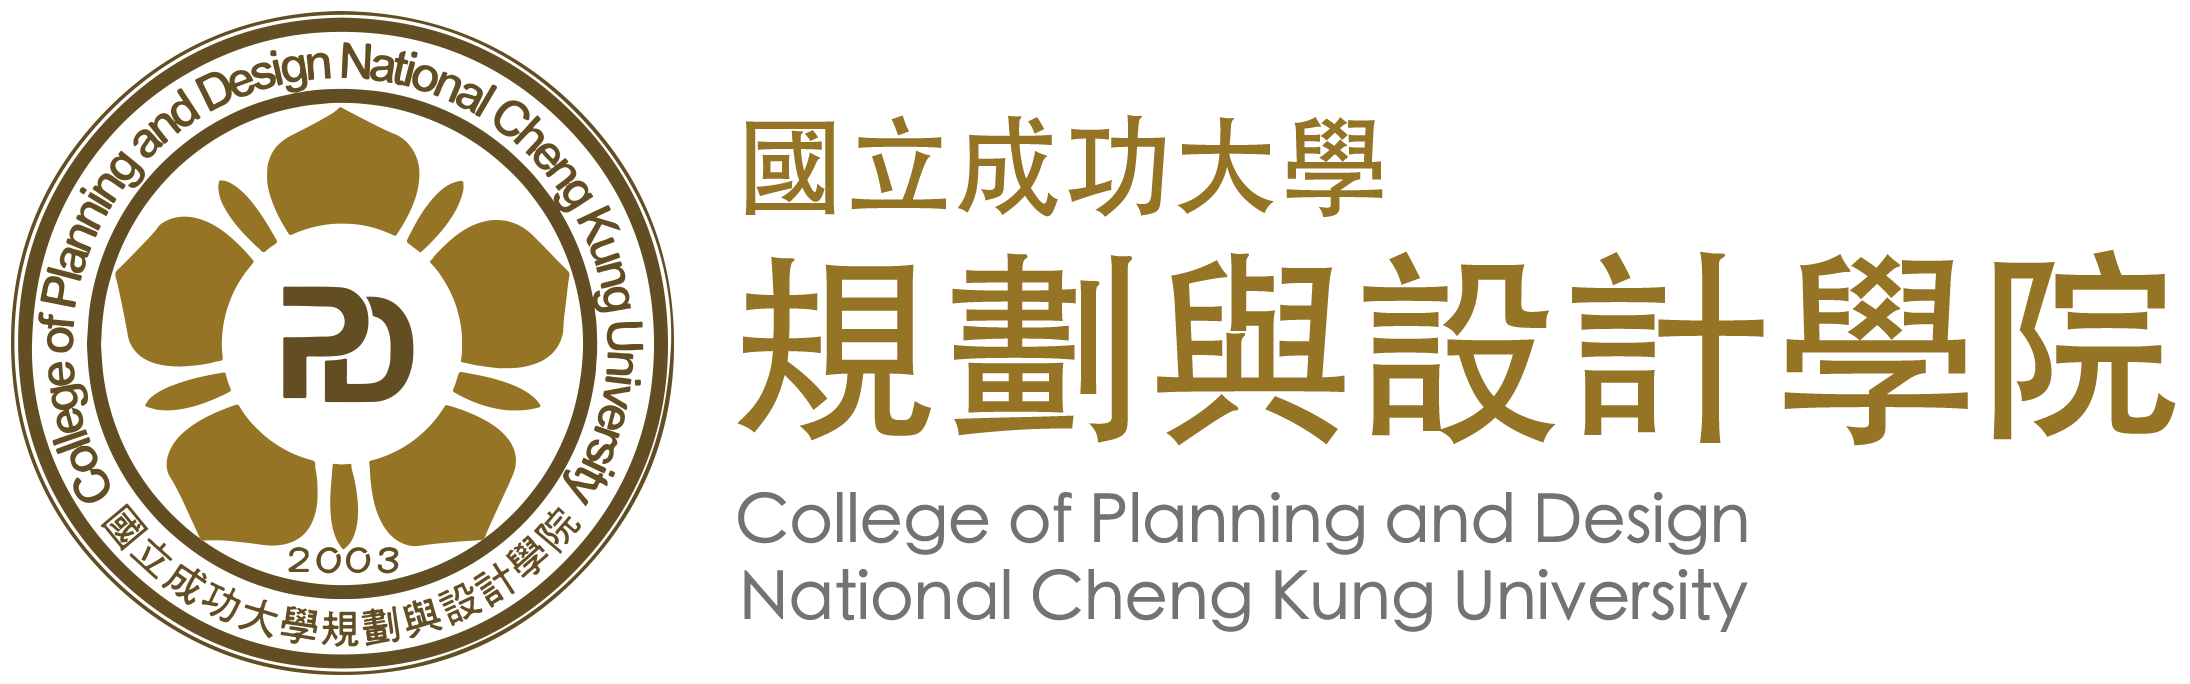 NCKU, College of Planning and Design